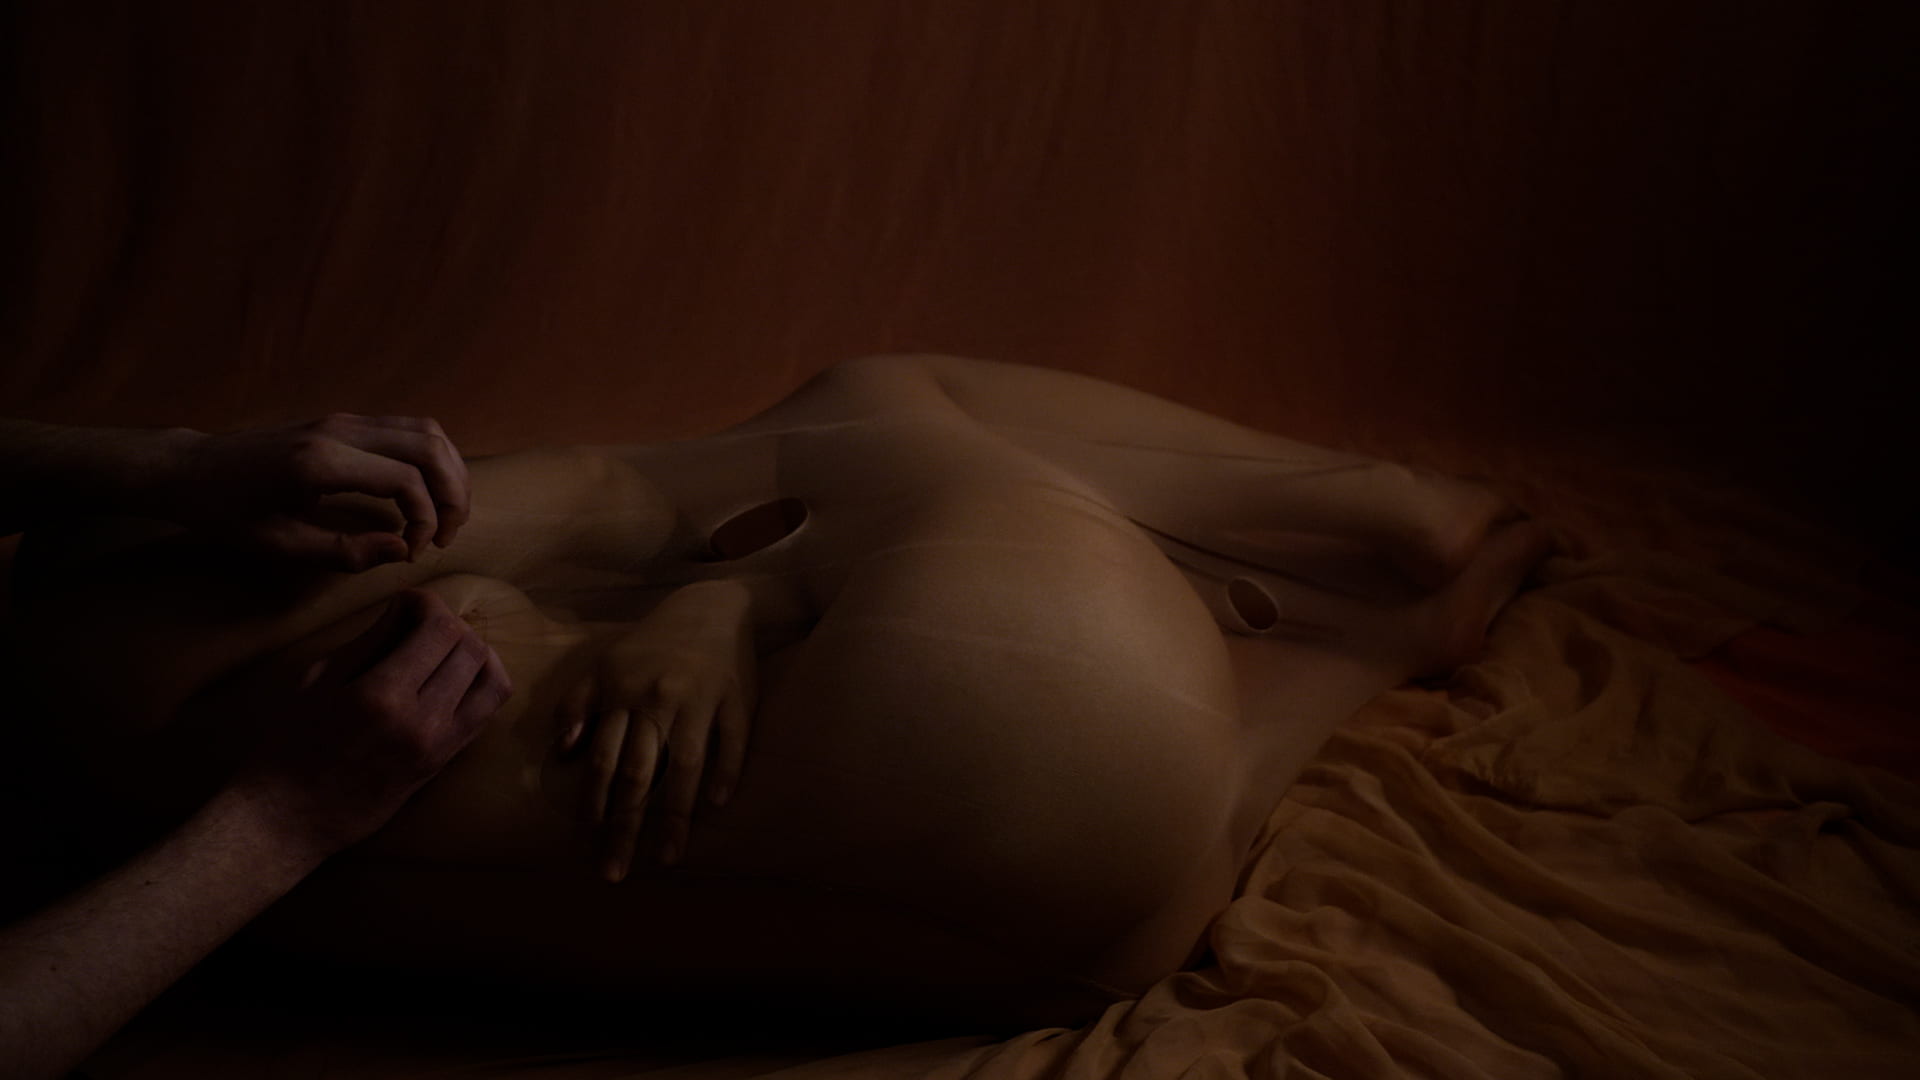 A video still of people's naked bodies in a dark space.